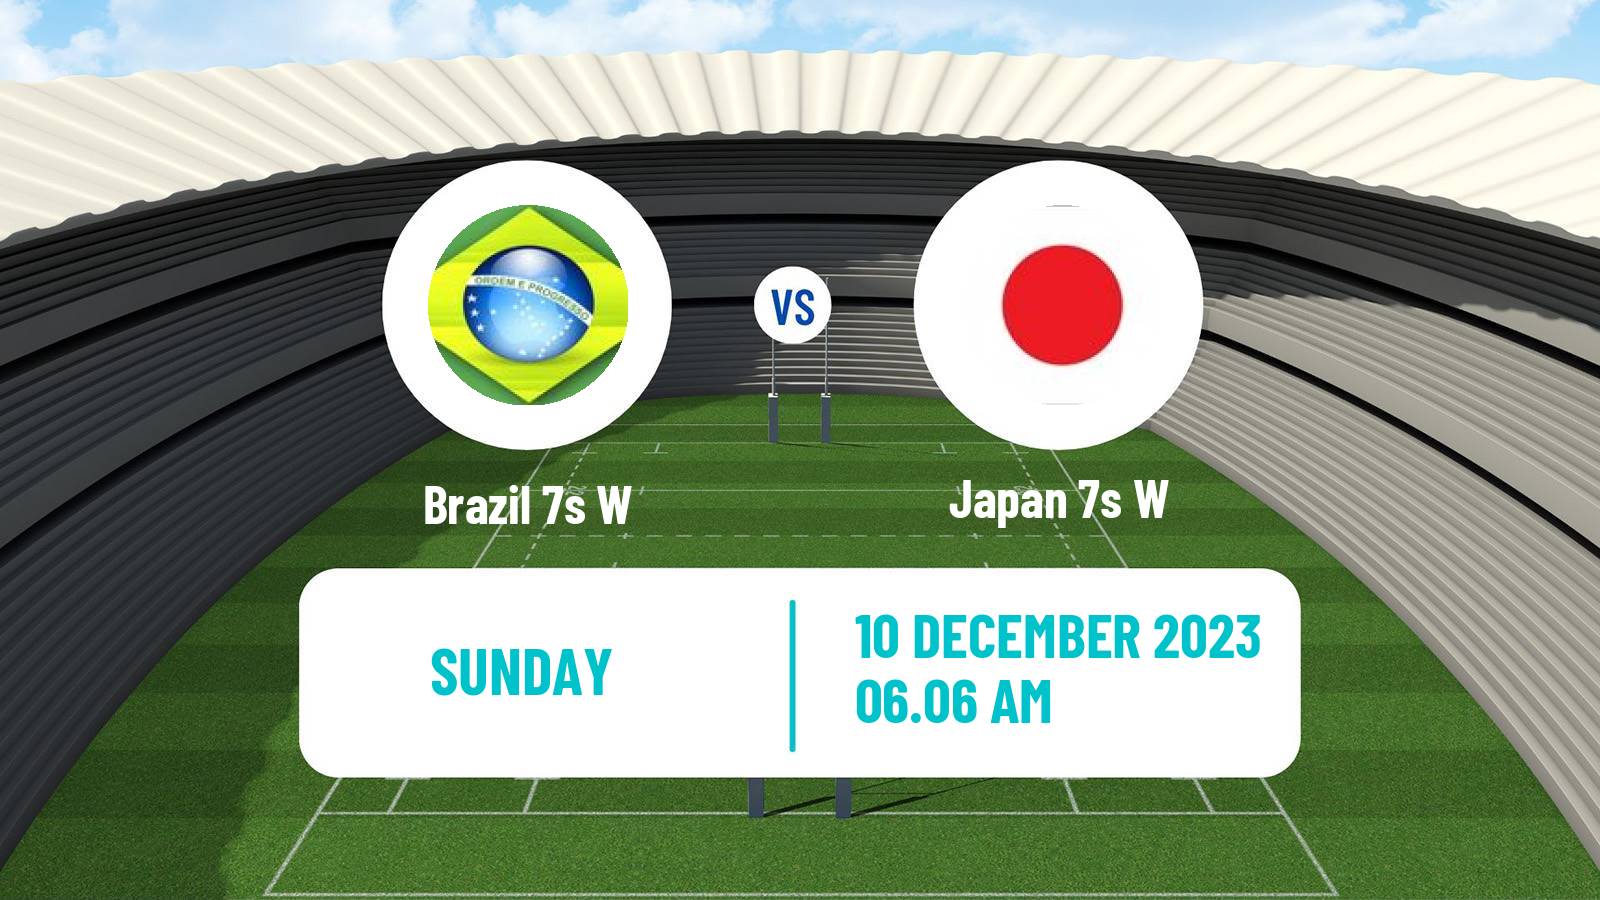 Rugby union Sevens World Series Women - South Africa Brazil 7s W - Japan 7s W